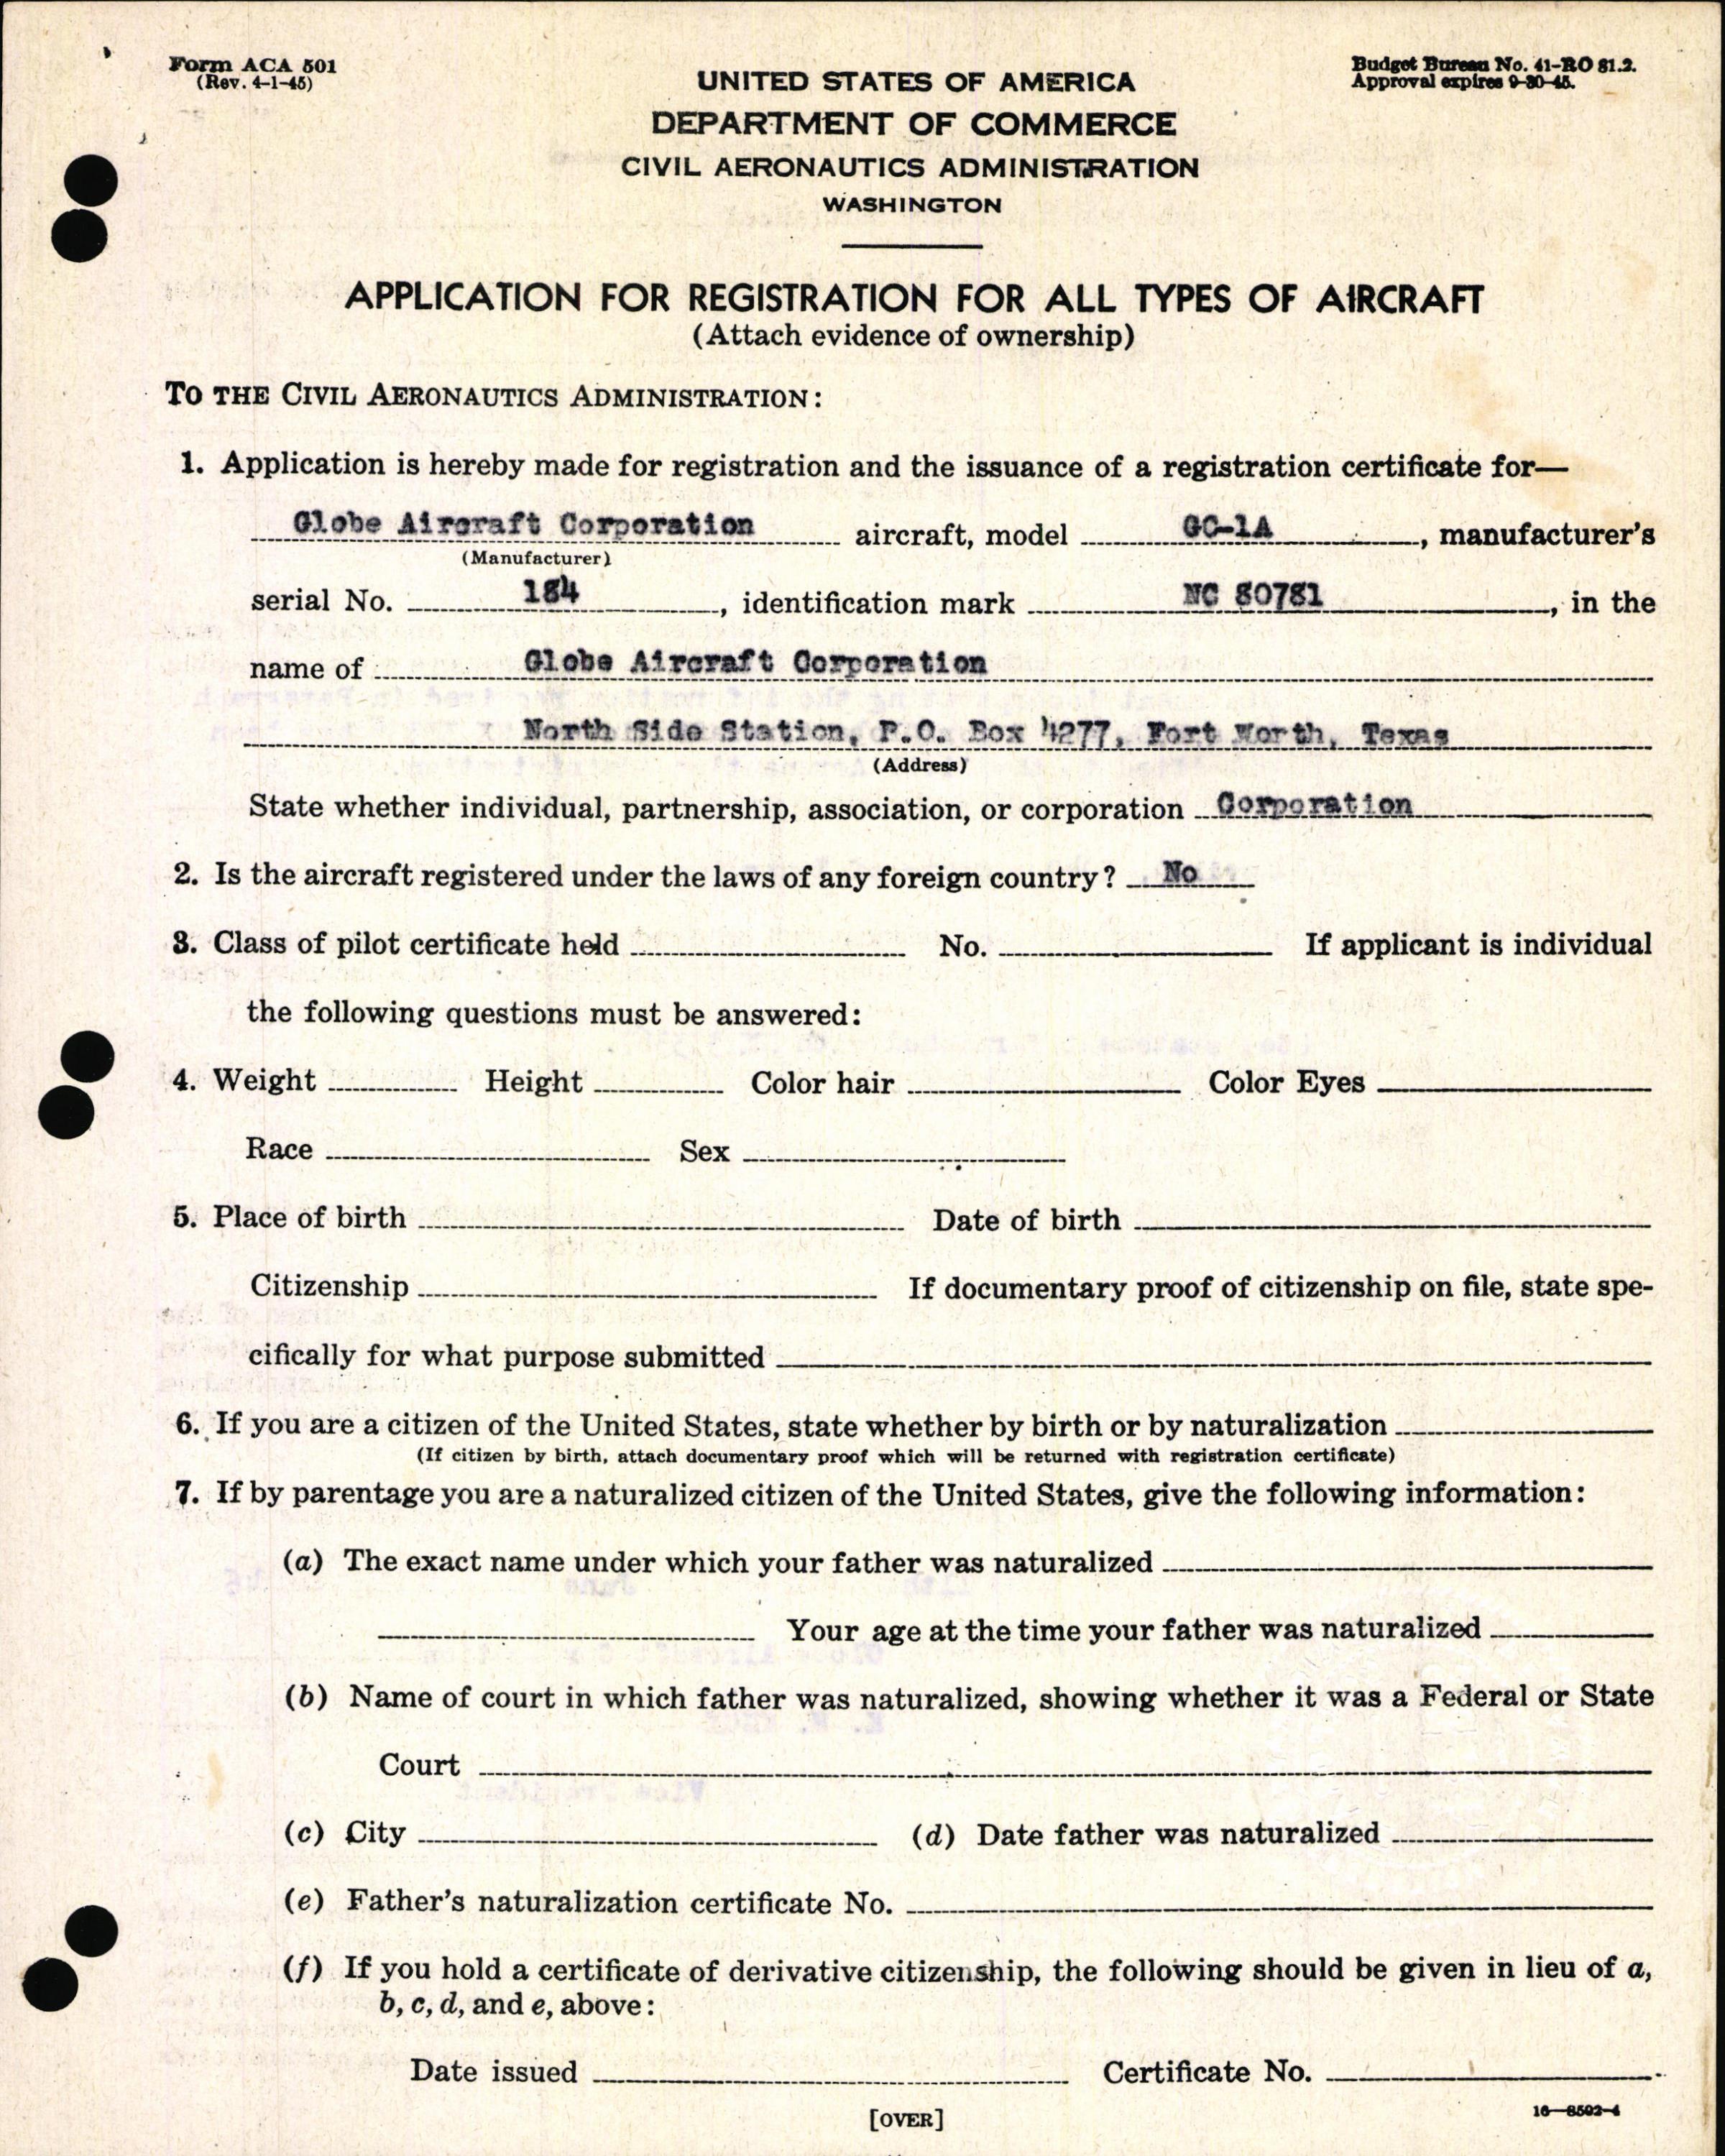 Sample page 5 from AirCorps Library document: Technical Information for Serial Number 184